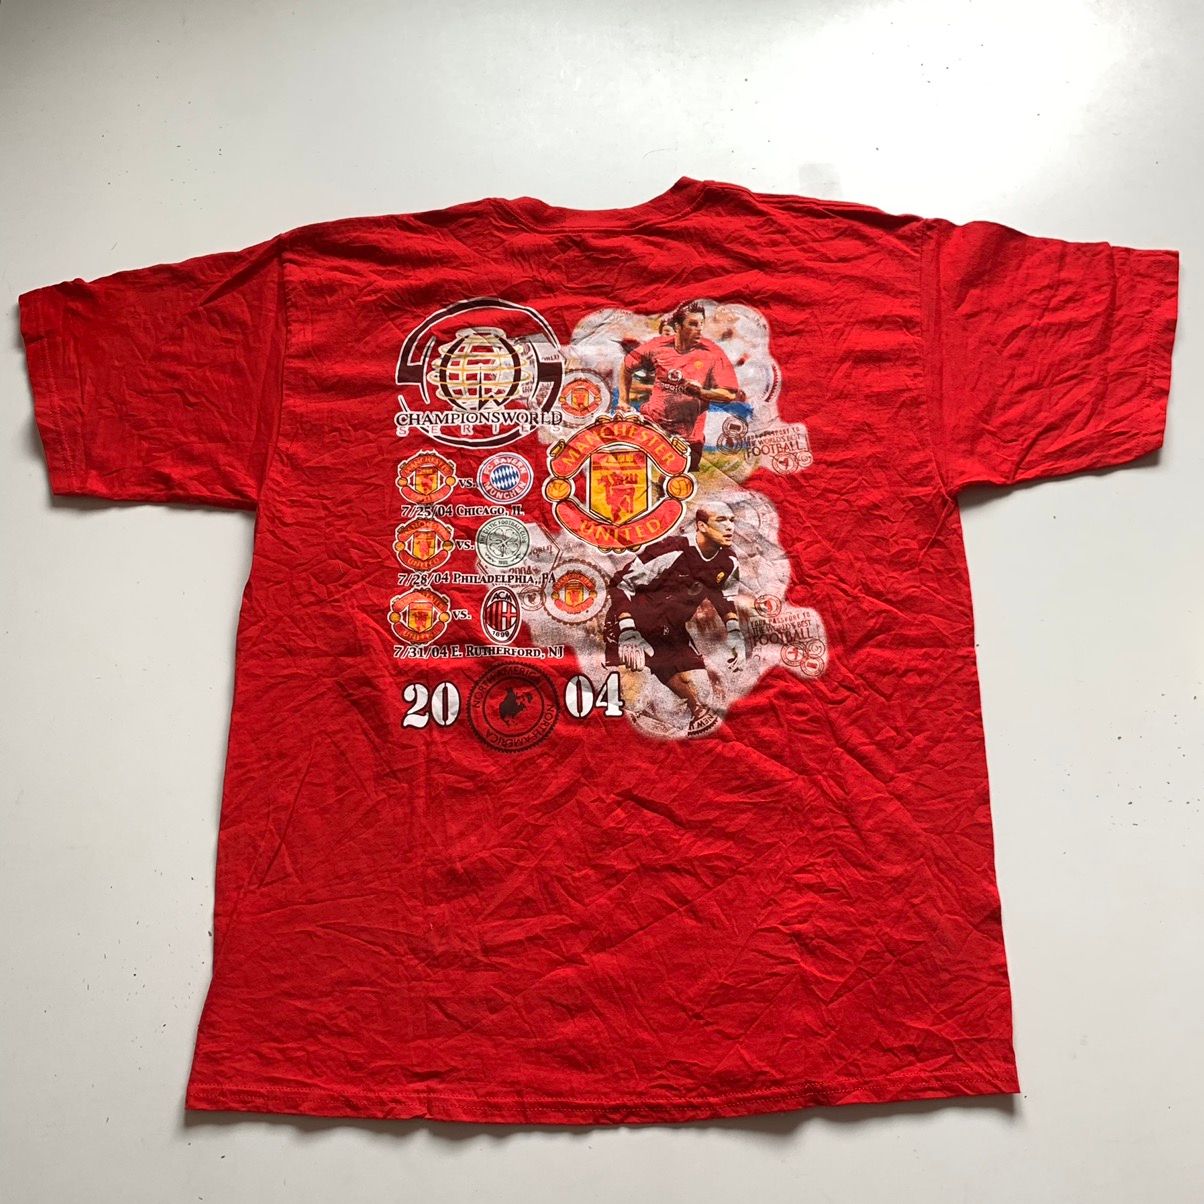 Nike Vintage 2004 Manchester United nike graphic t shirt red Size US XL / EU 56 / 4 - 1 Preview